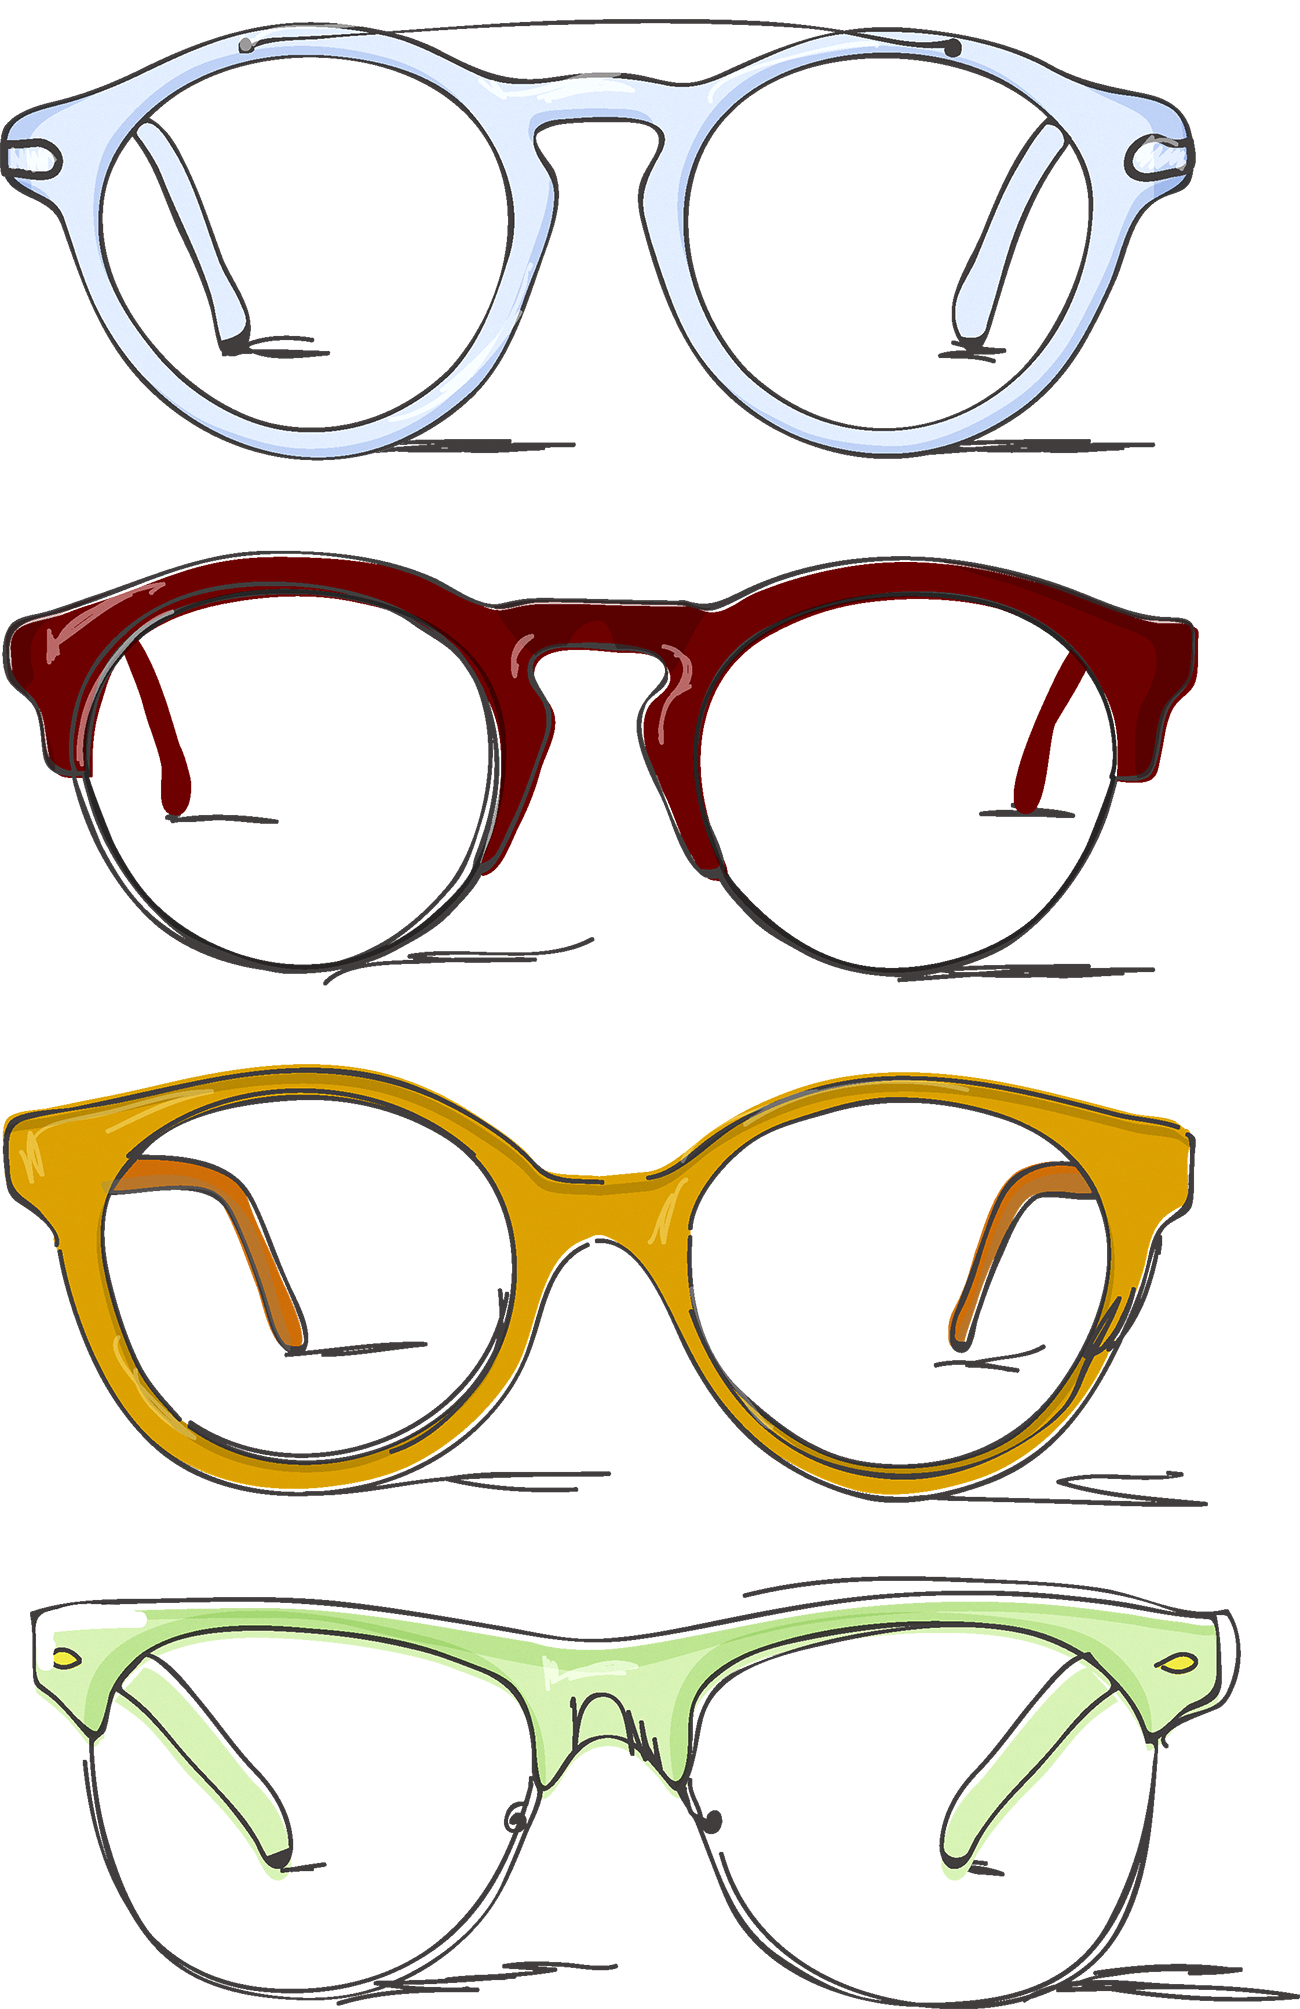 Vision clipart eyeglass frame. Browline glasses drawing clip